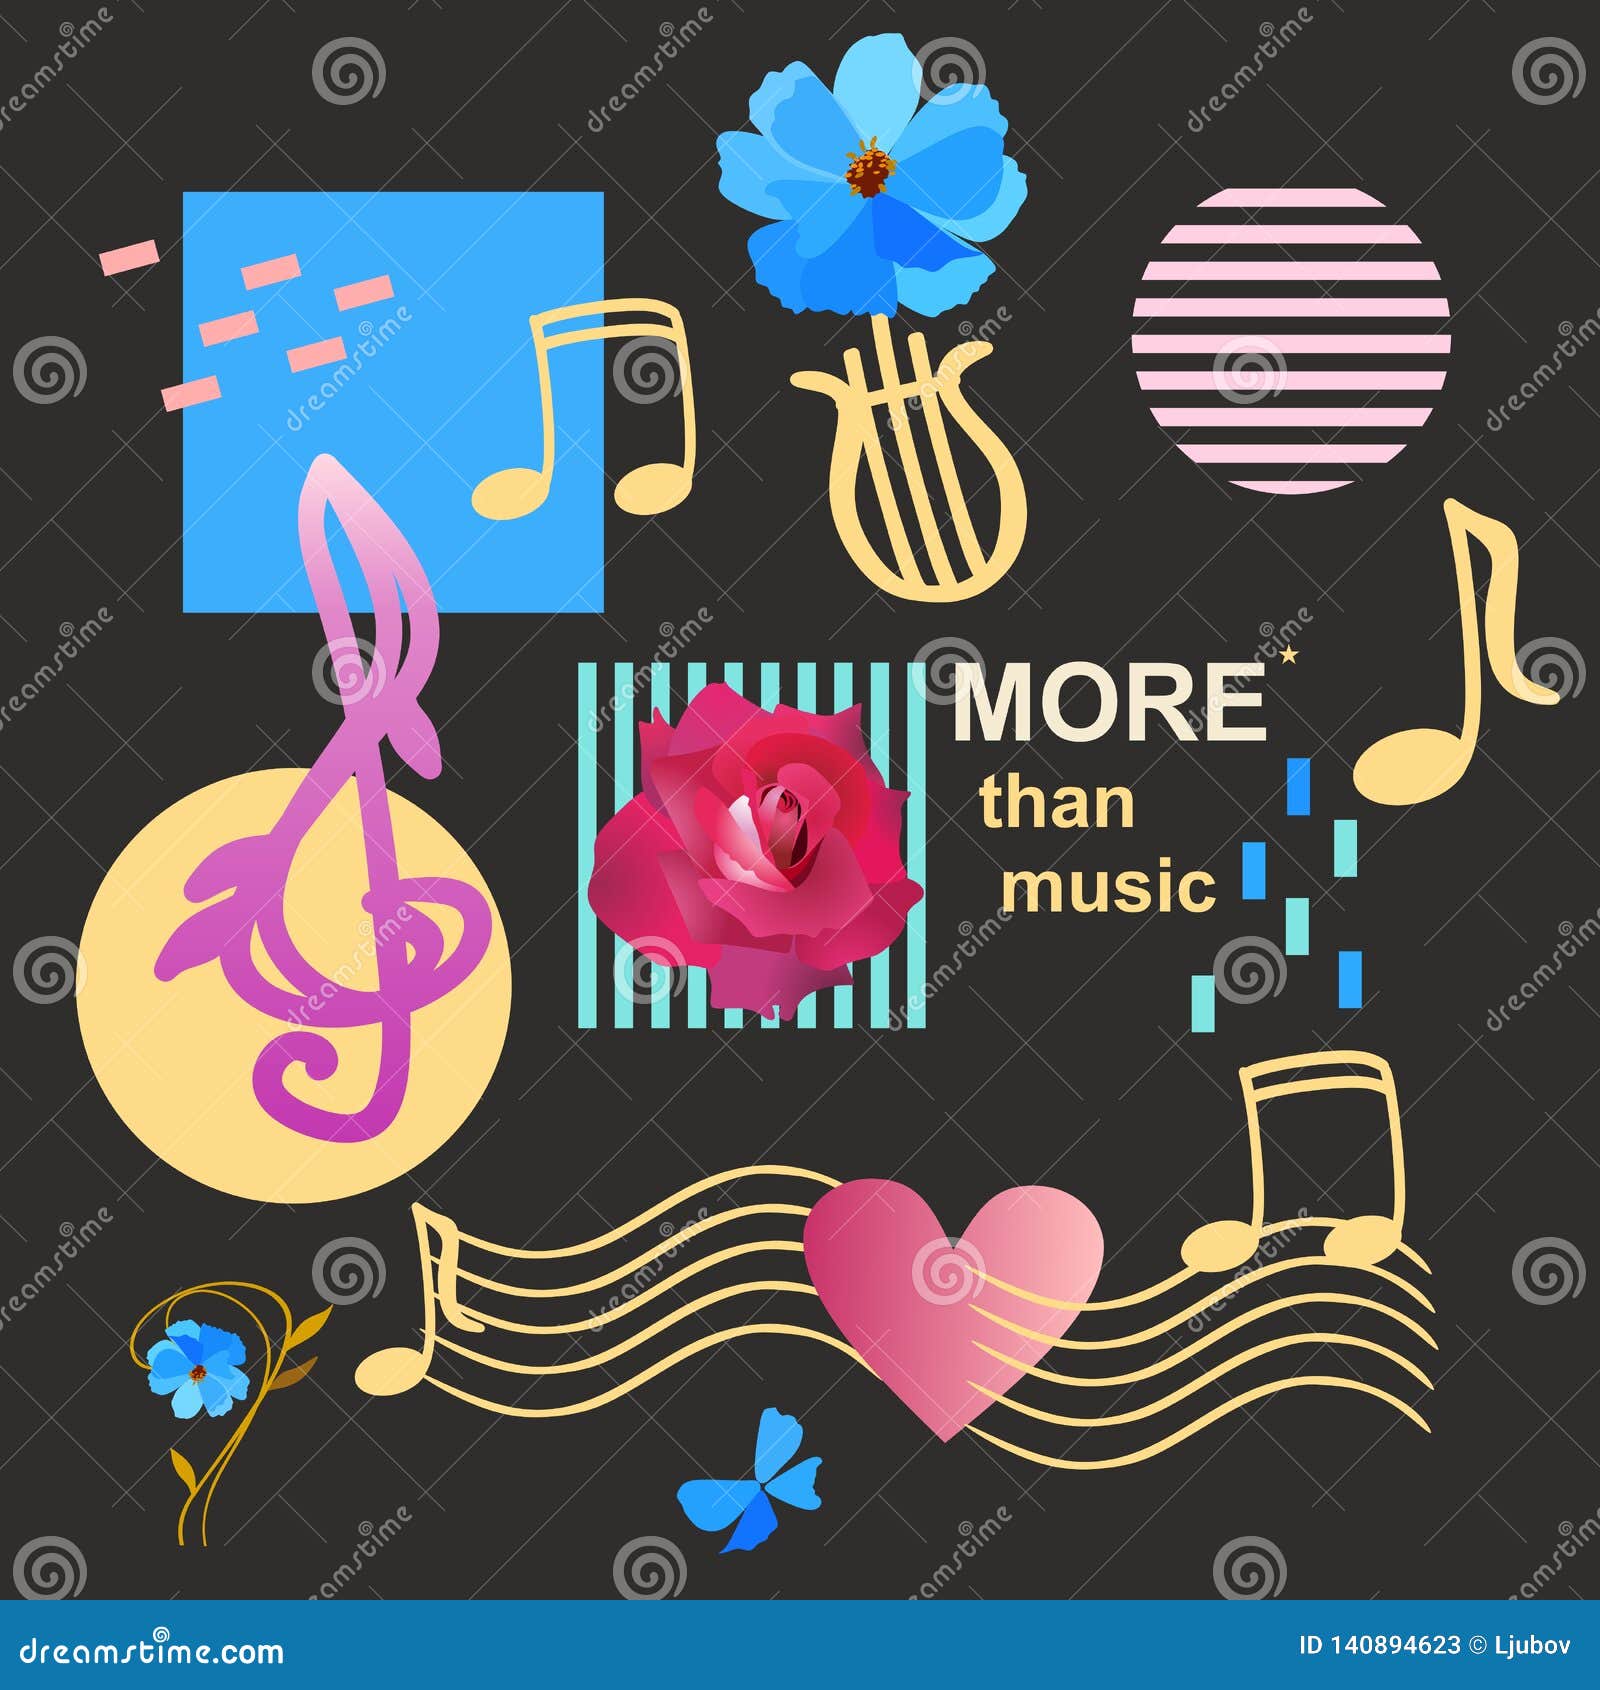 fashionable musical background with treble and bass clefs, musical notes, lyre, abstract geometric figures, garden flowers